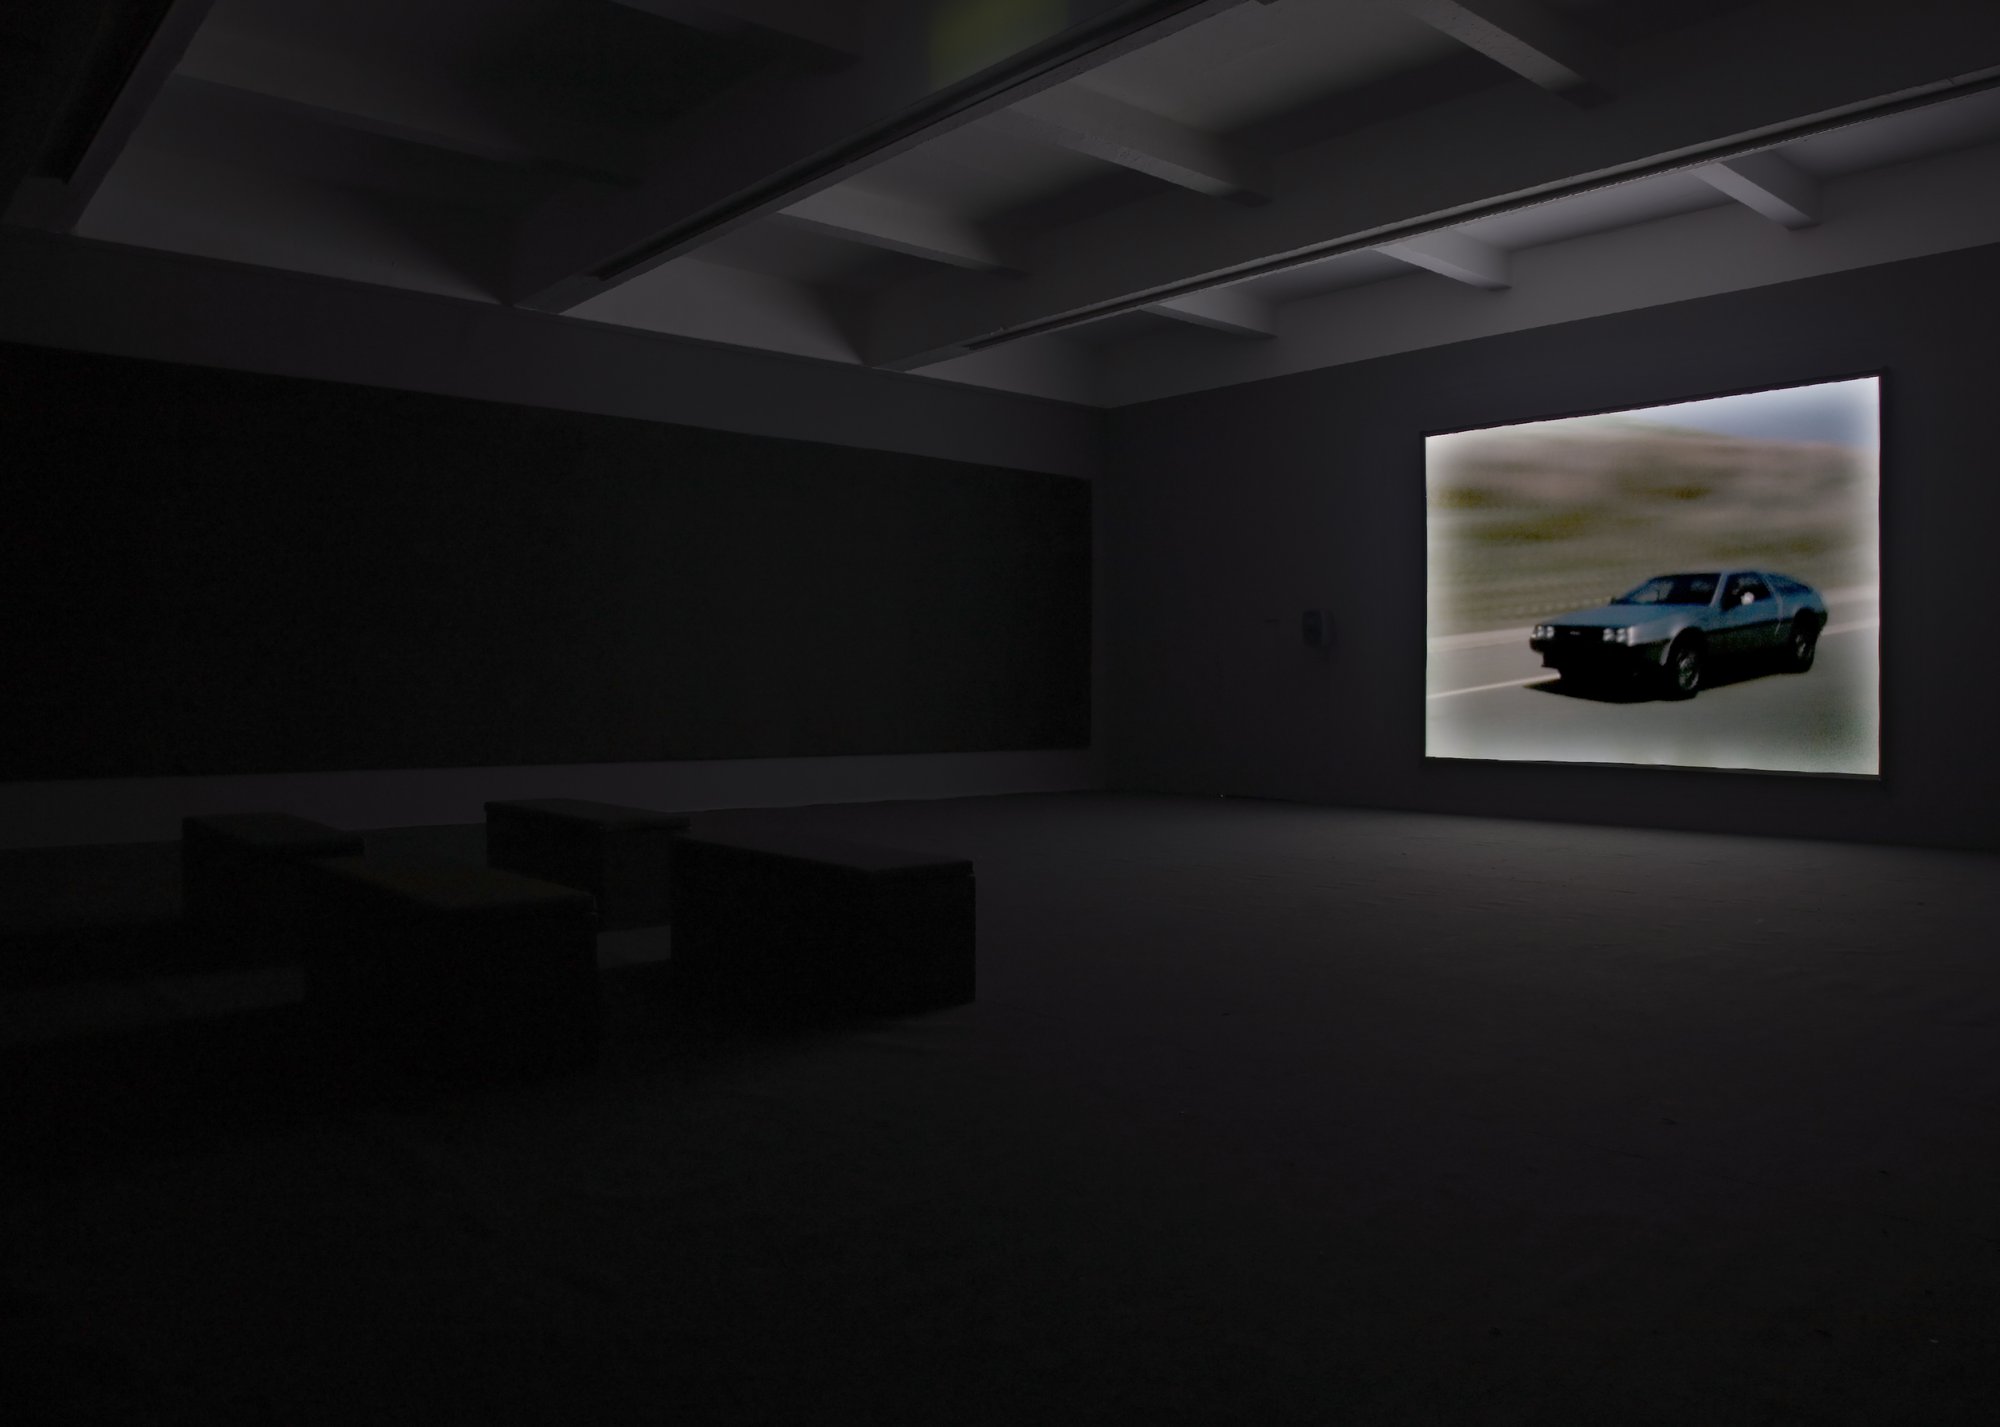 Duncan Campbell, Make it New John, 16 mm film and analogue video transferred to digital video, 50 min., 2009. Installation view, Make It New John, Chisenhale Gallery, London, 2009